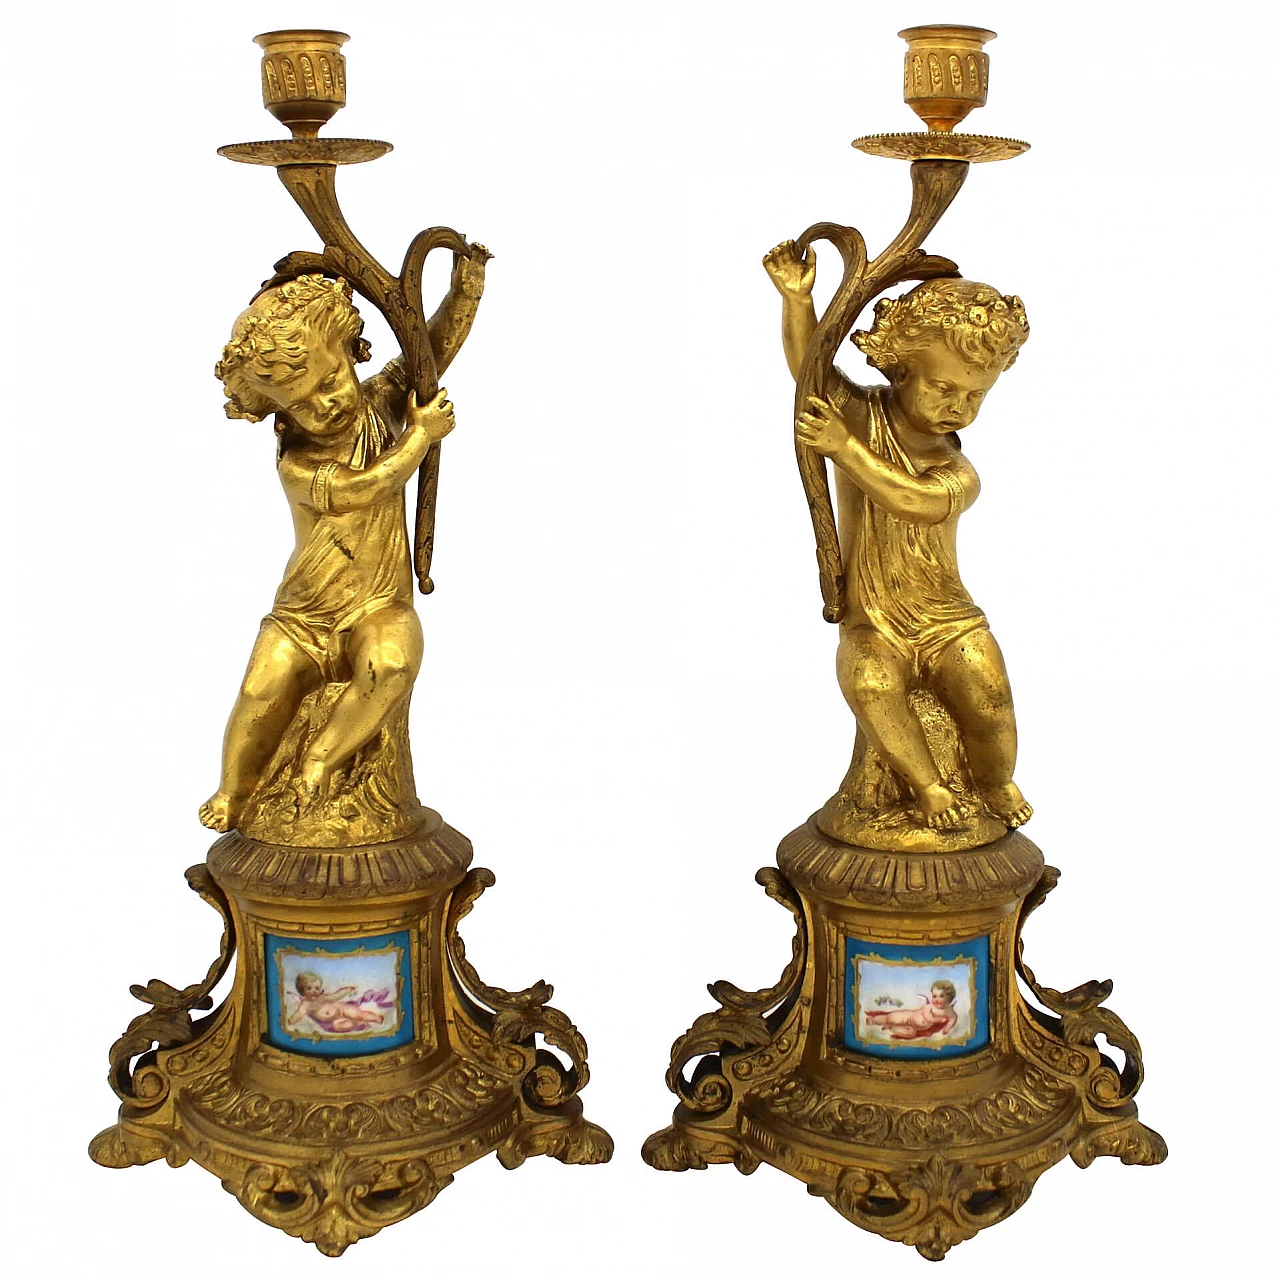 Pair of Napoleon III candlesticks in gilded bronze and painted porcelain, 19th century 1250300